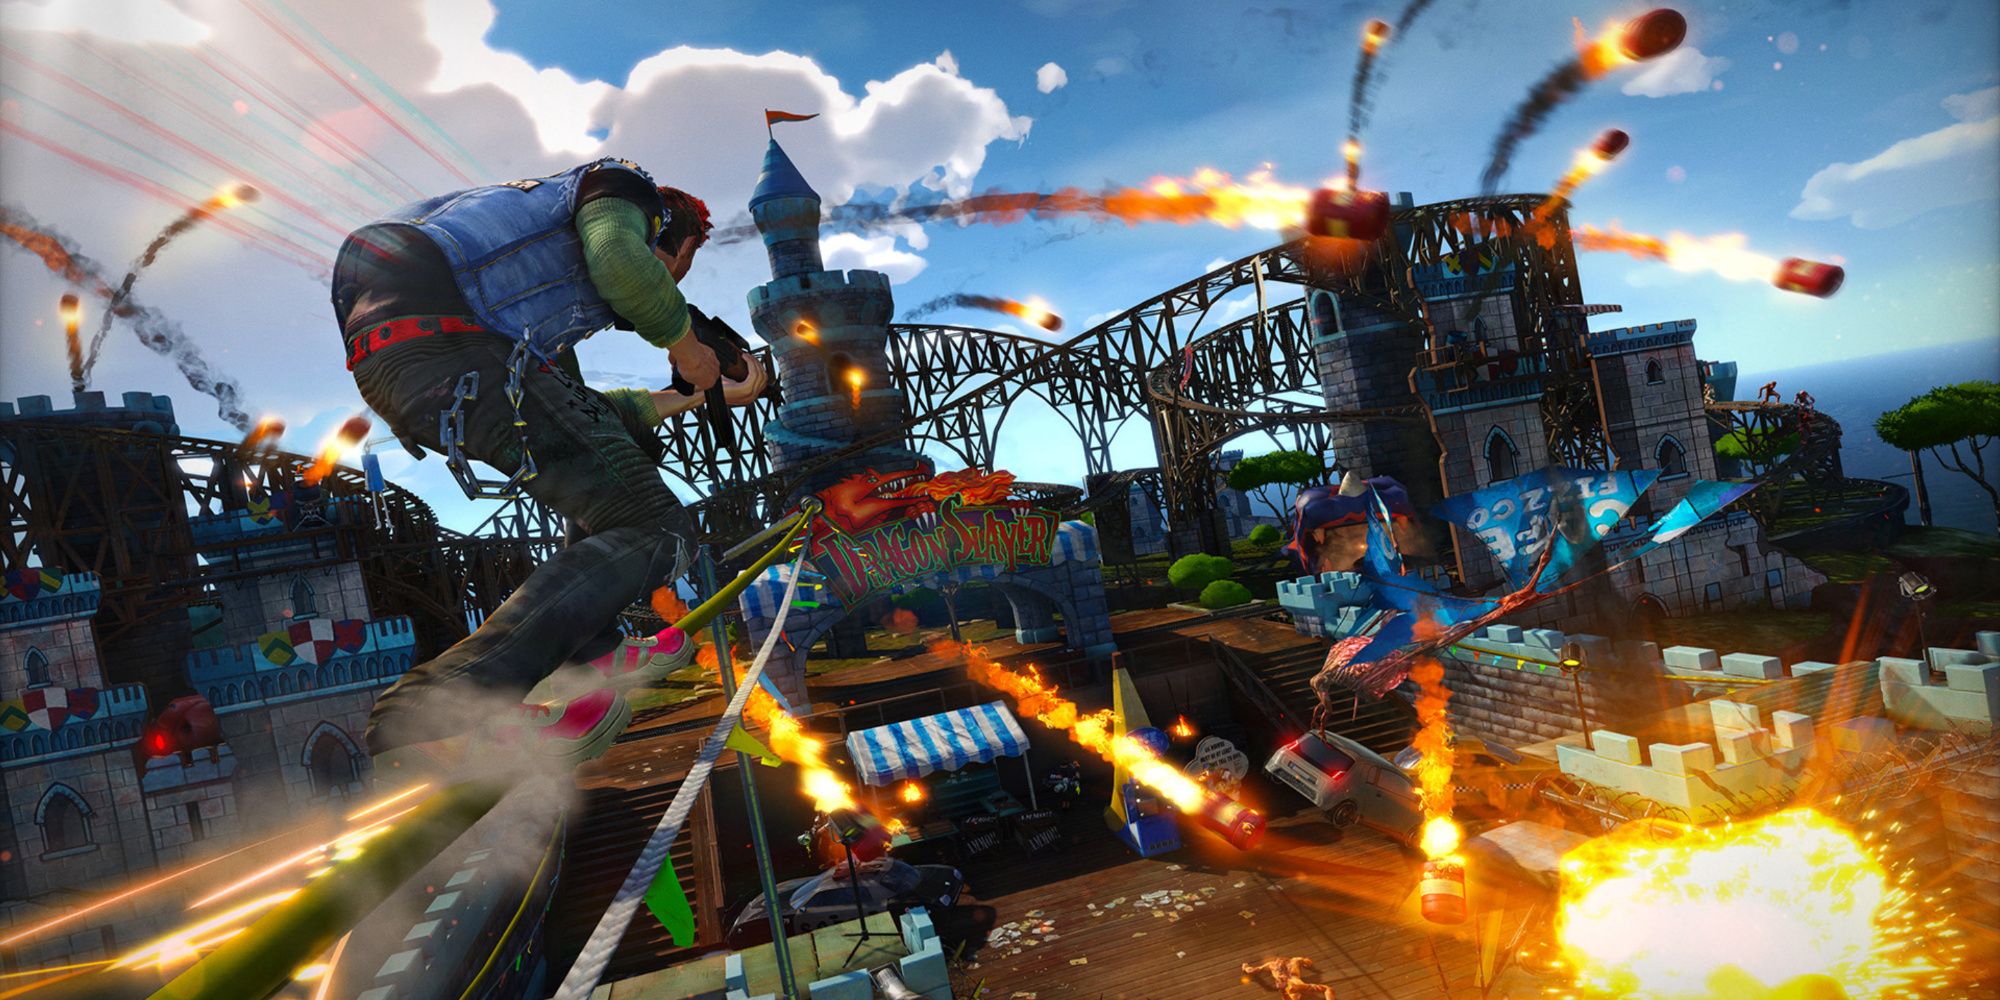 Fighting enemies in Sunset Overdrive